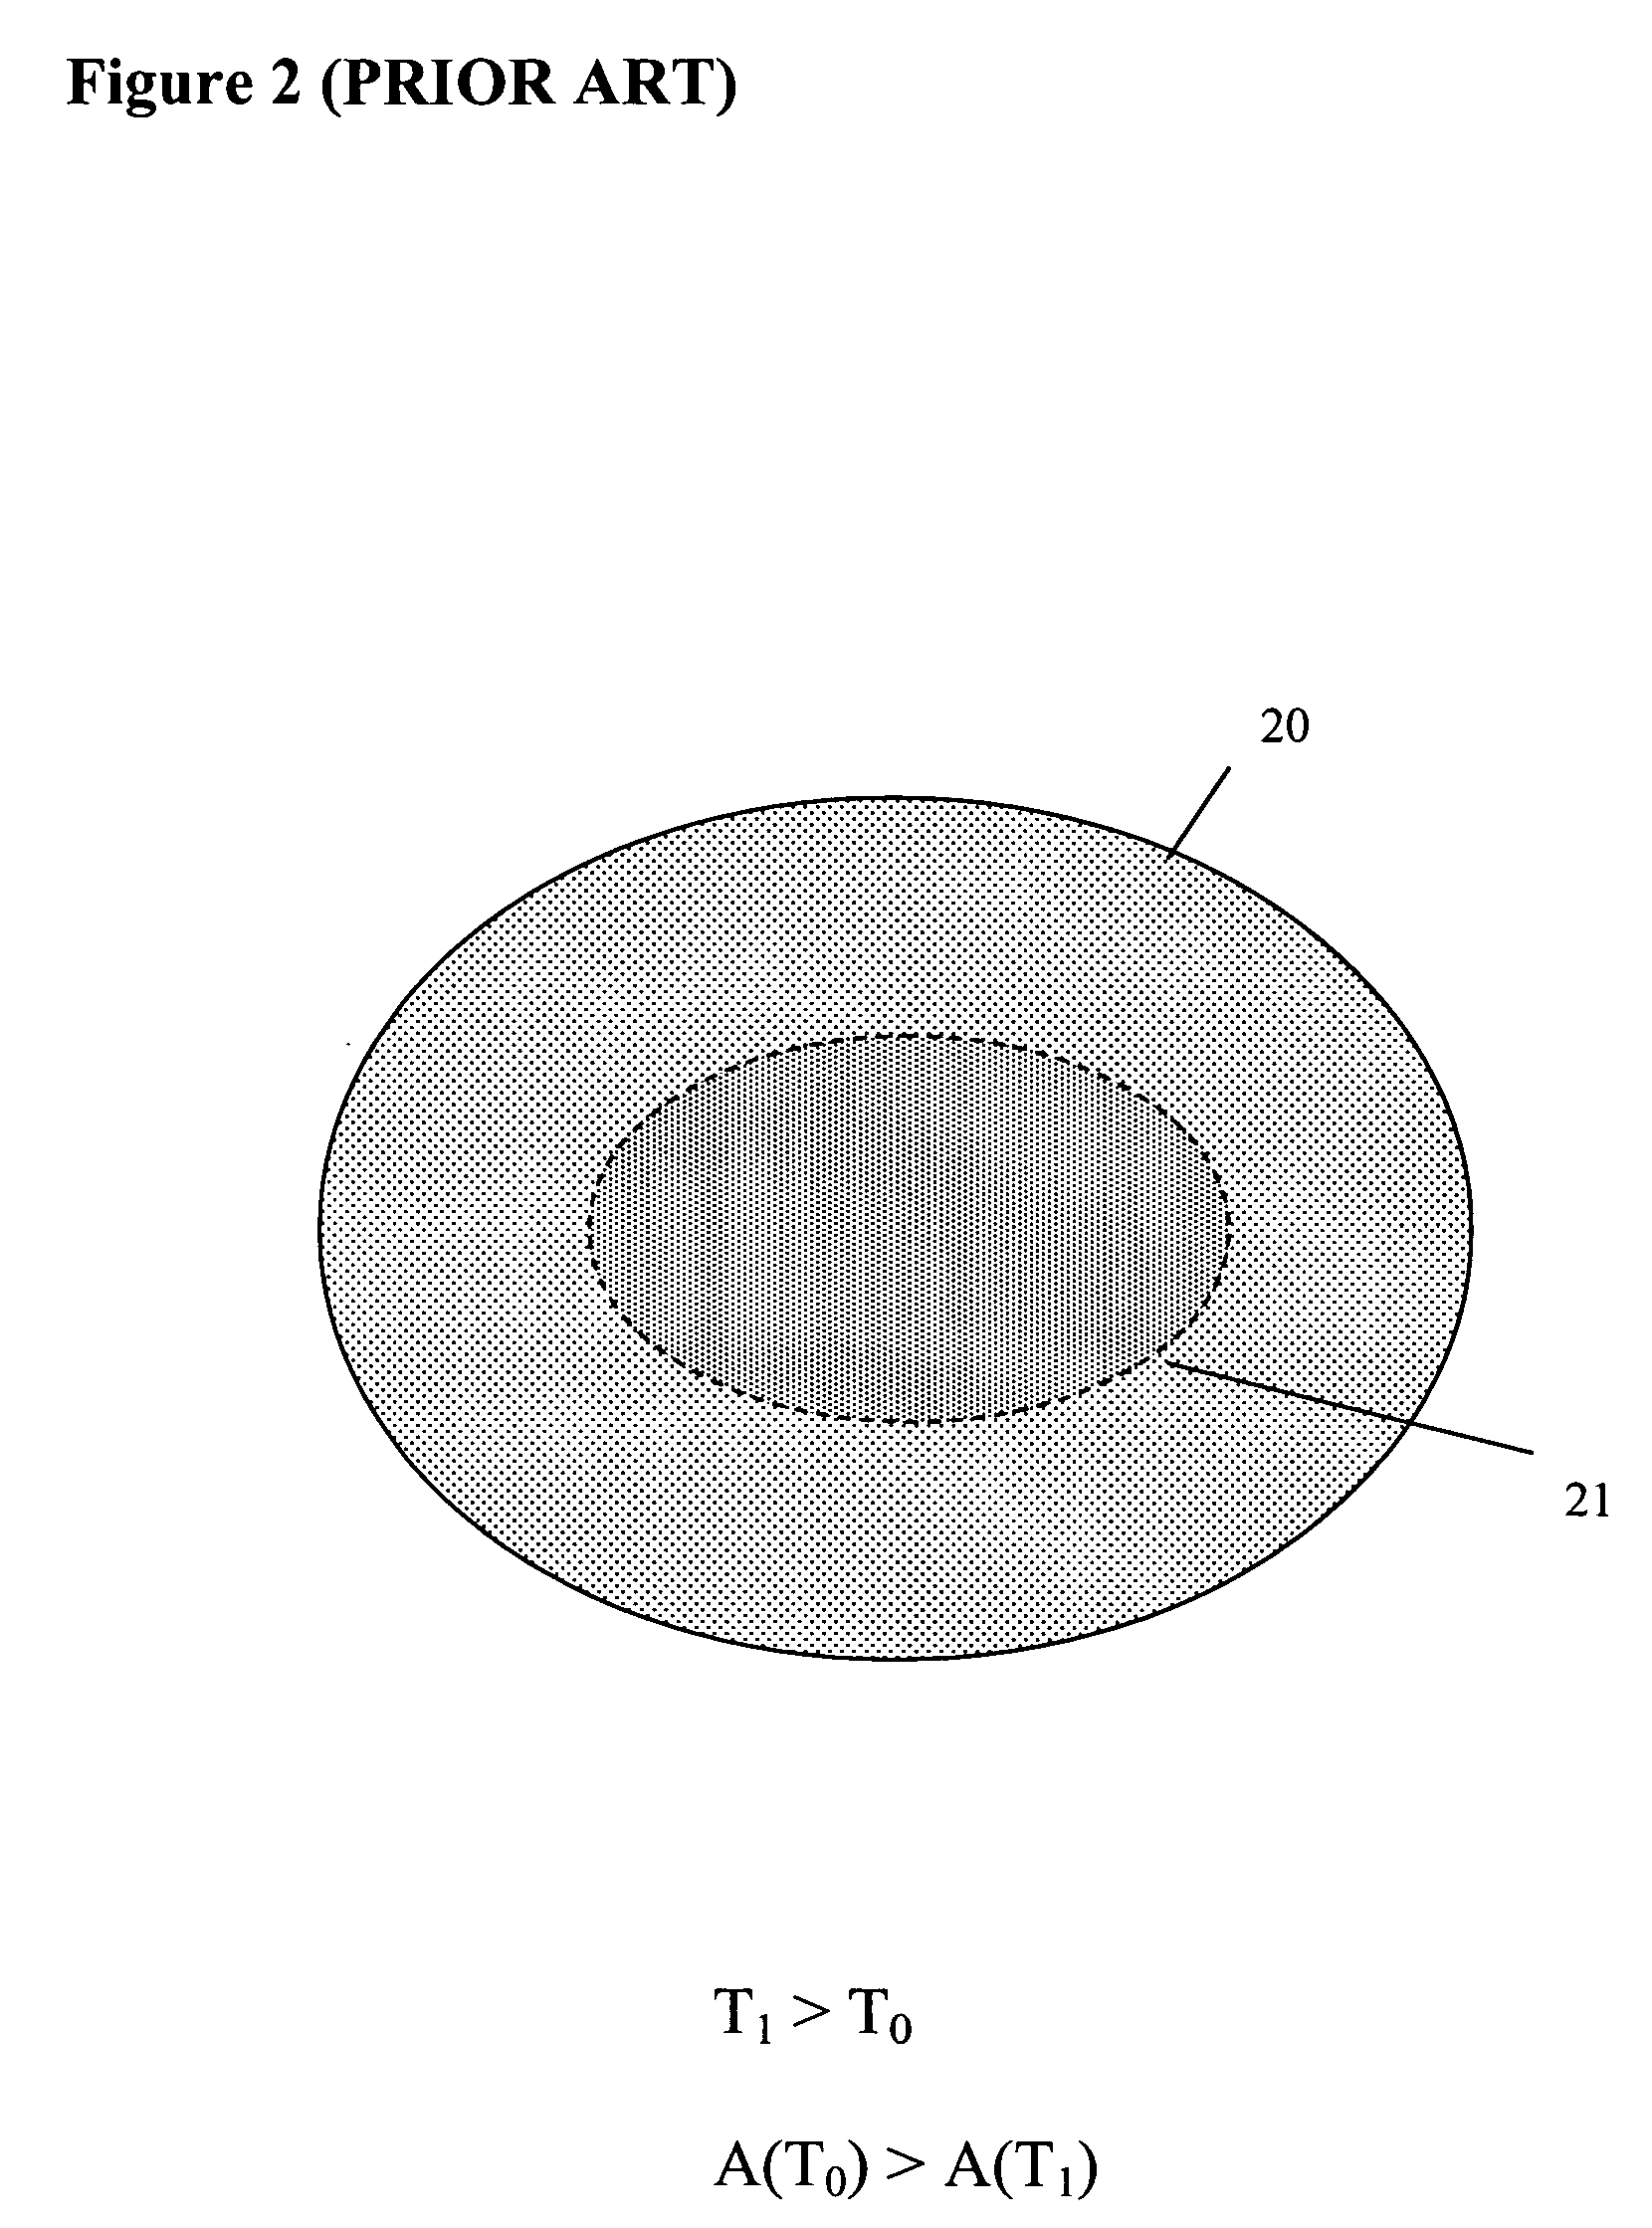 Means and method for a liquid metal evaporation source with integral level sensor and external reservoir